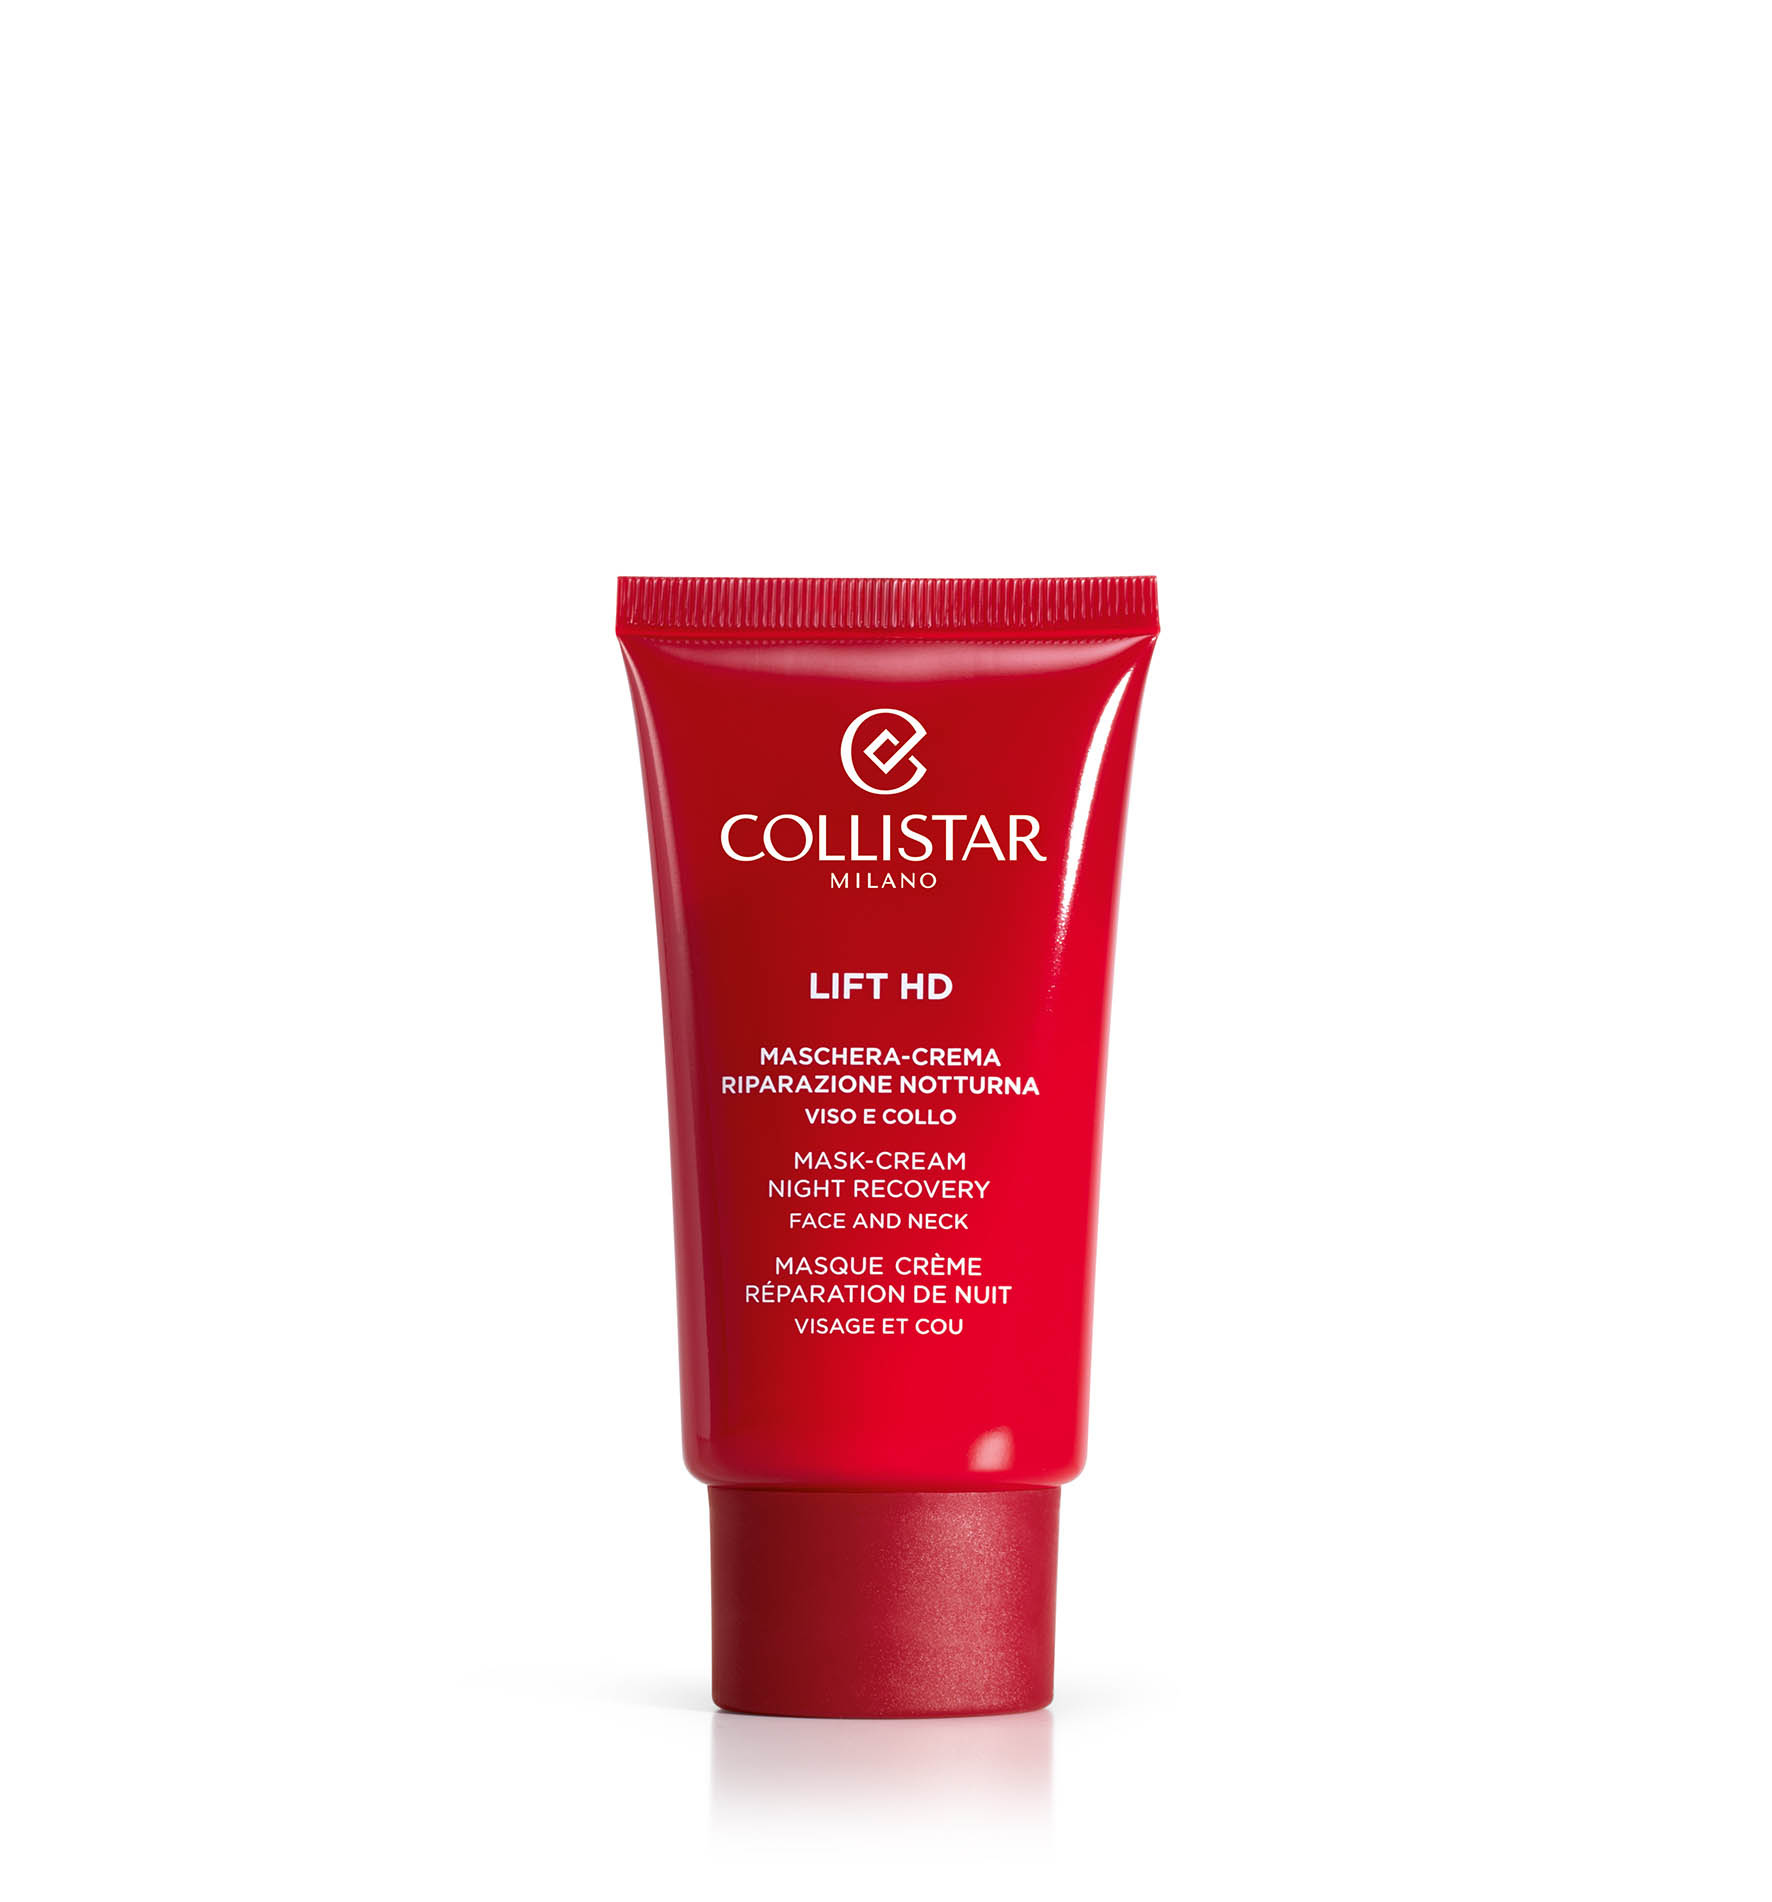 MASK-CREAM NIGHT RECOVERY FACE AND NECK - Liftend | Collistar - Shop Online Ufficiale